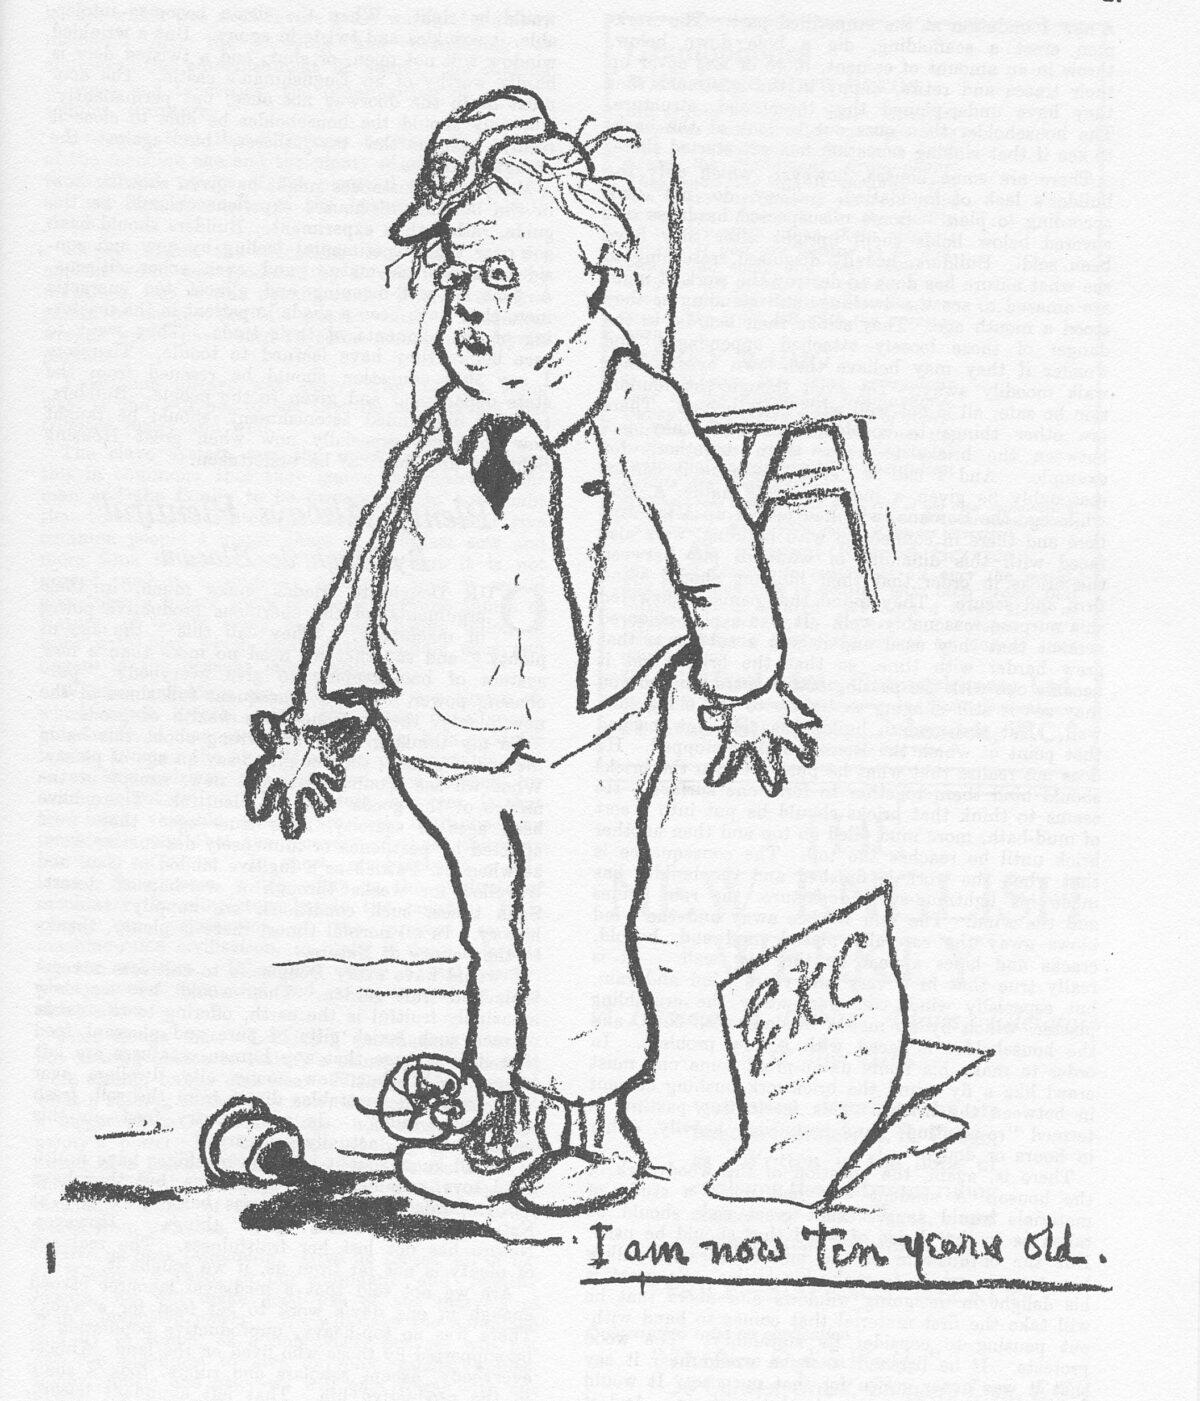 It is clear that Chesterton did not take himself too seriously. Here is a cartoon he drew for the 10th anniversary issue of G.K.'s Weekly. (Courtesy of The Society of Gilbert Keith Chesterton)